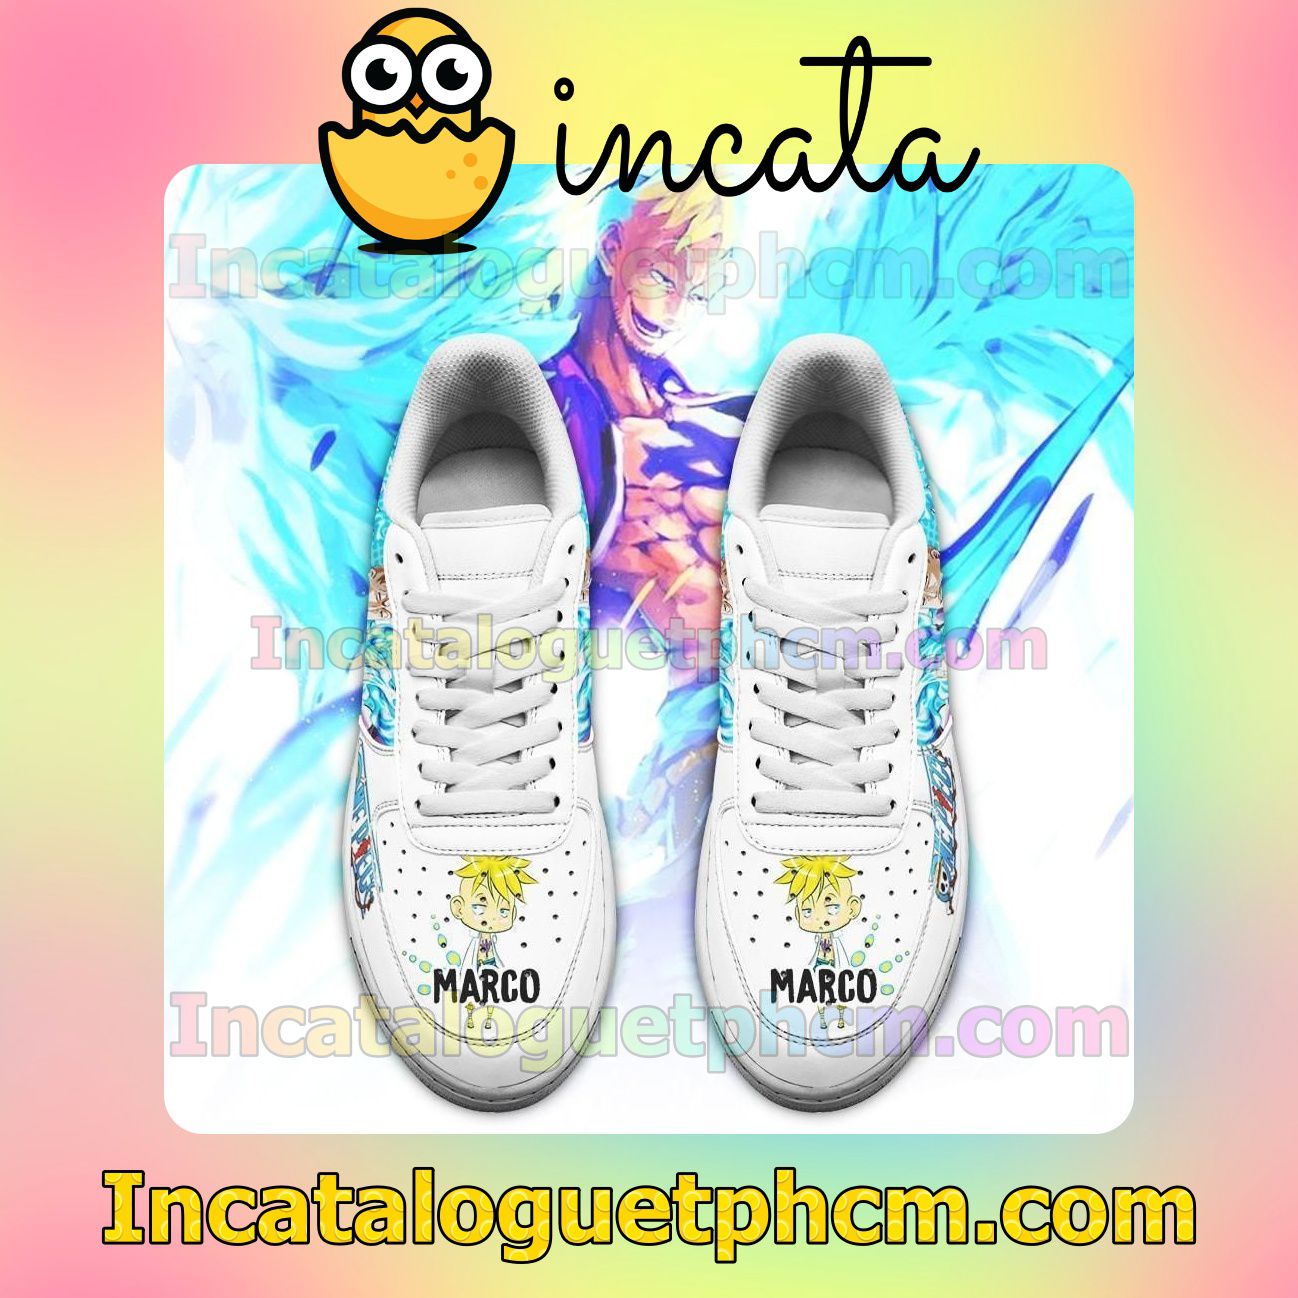 All Over Print Marco One Piece Anime Nike Low Shoes Sneakers